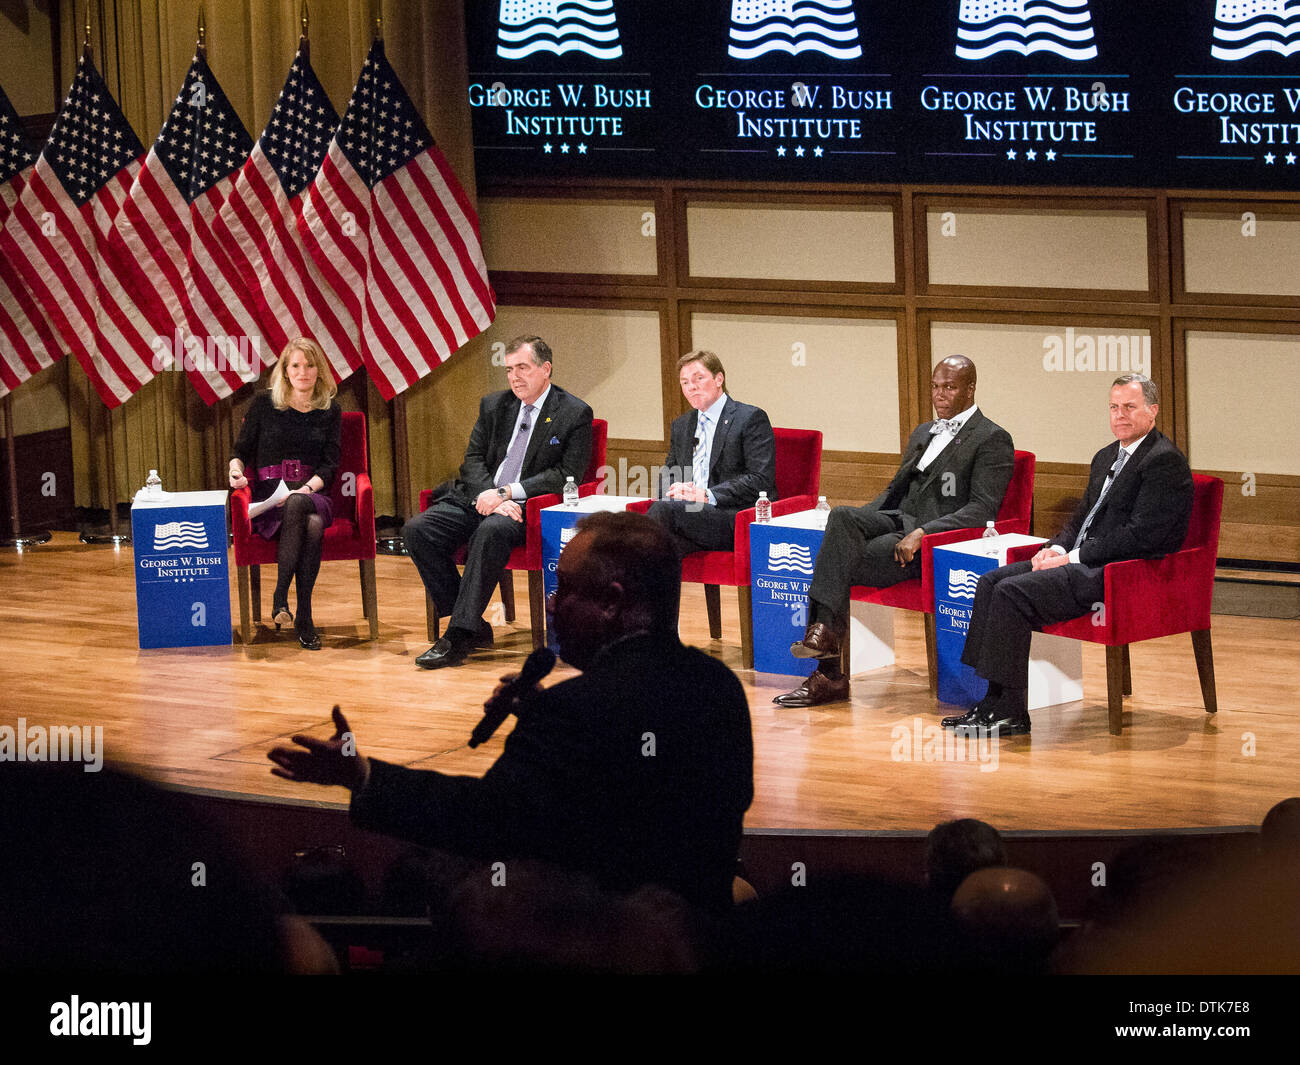 Launching the George W. Bush Institute's Military Service Initiative Summit featured panels discussing ways to help veterans. Stock Photo